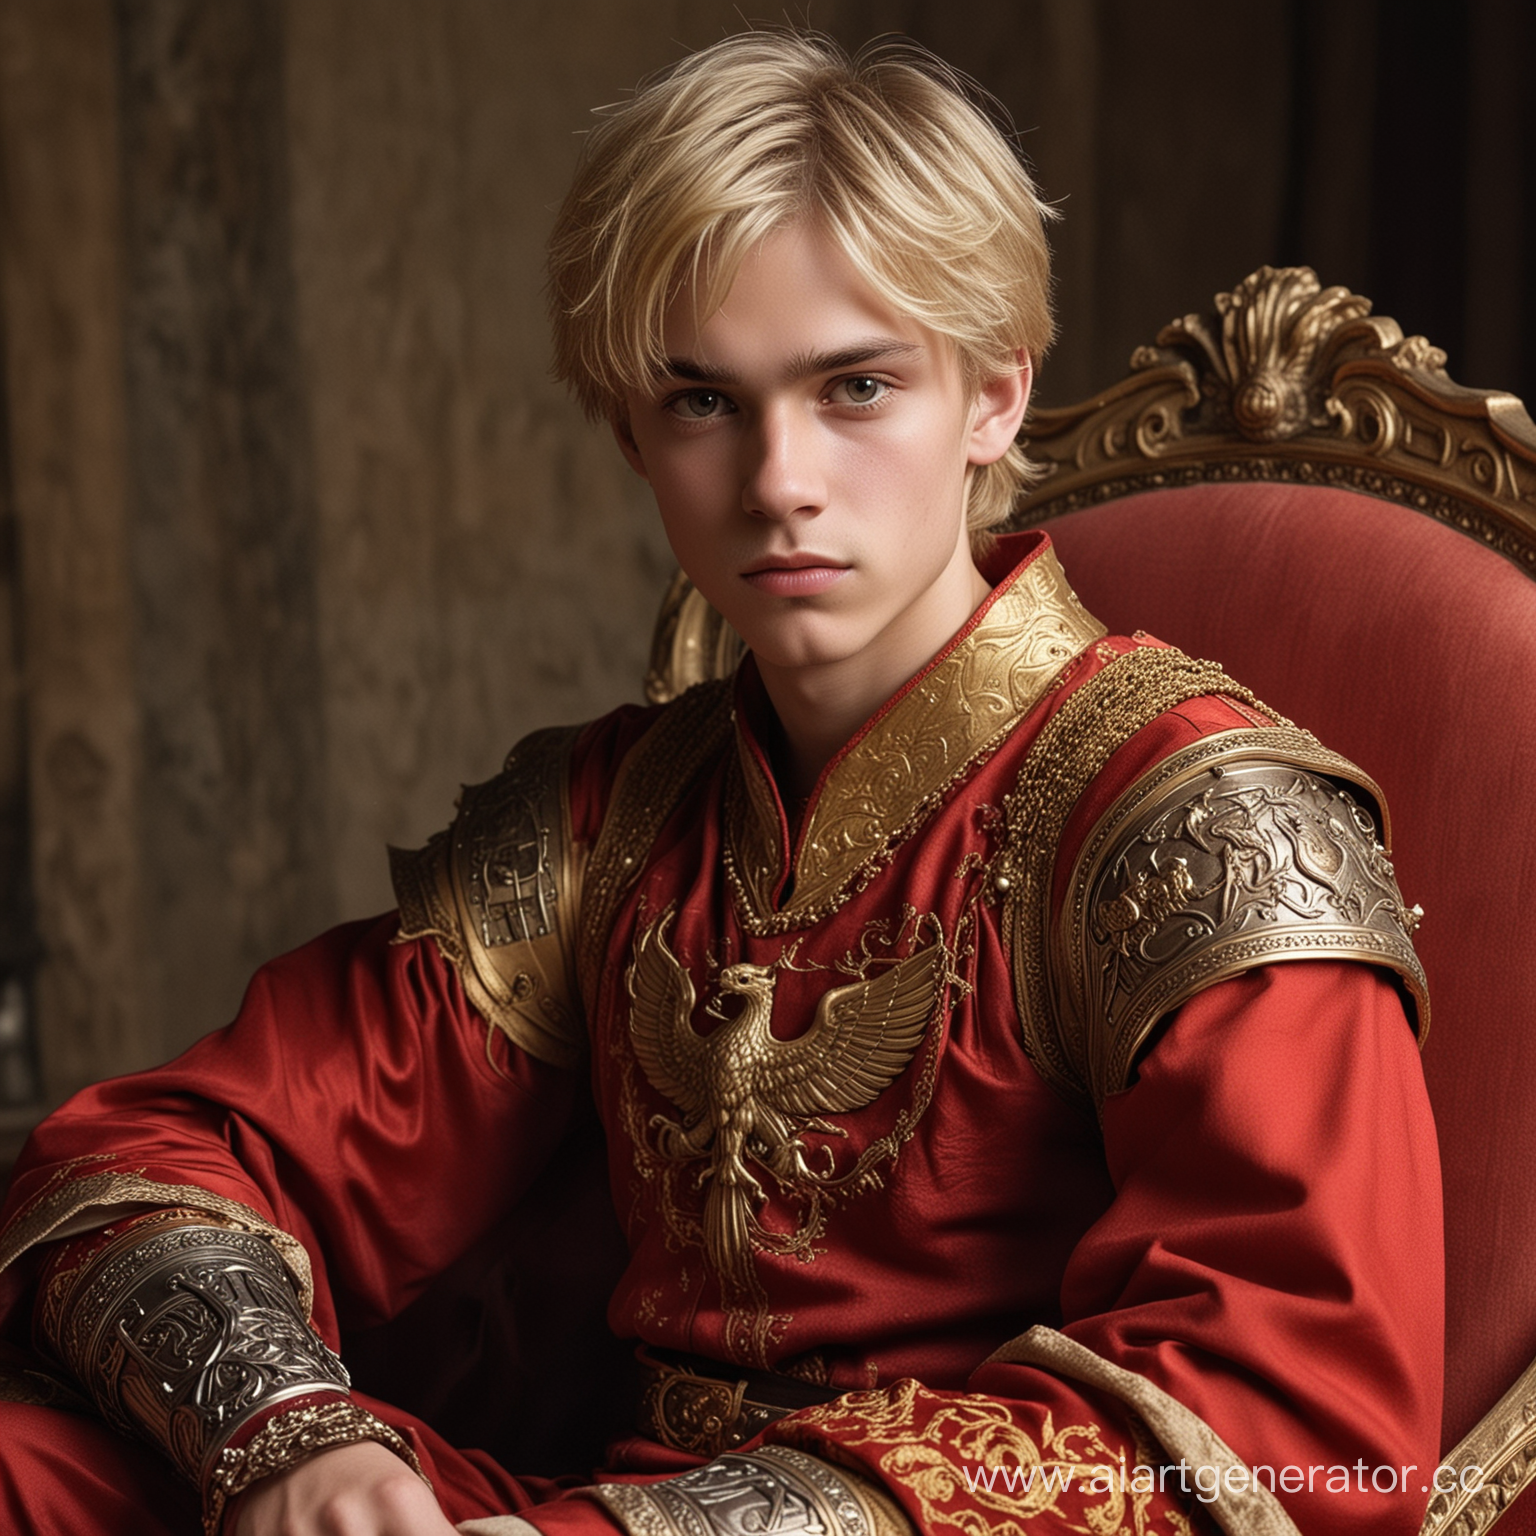 A young prince fifteen years old. Blond hair, blond, thin eyebrows, pleasant facial features, large brown eyes, good looks, slim figure. He is sitting in an armchair with a small sword in his hands, dressed in red and gold clothes with the image of a griffin.
A sullen expression on his face, a heavy character, a sad look.
In the style of fantasy fairytale